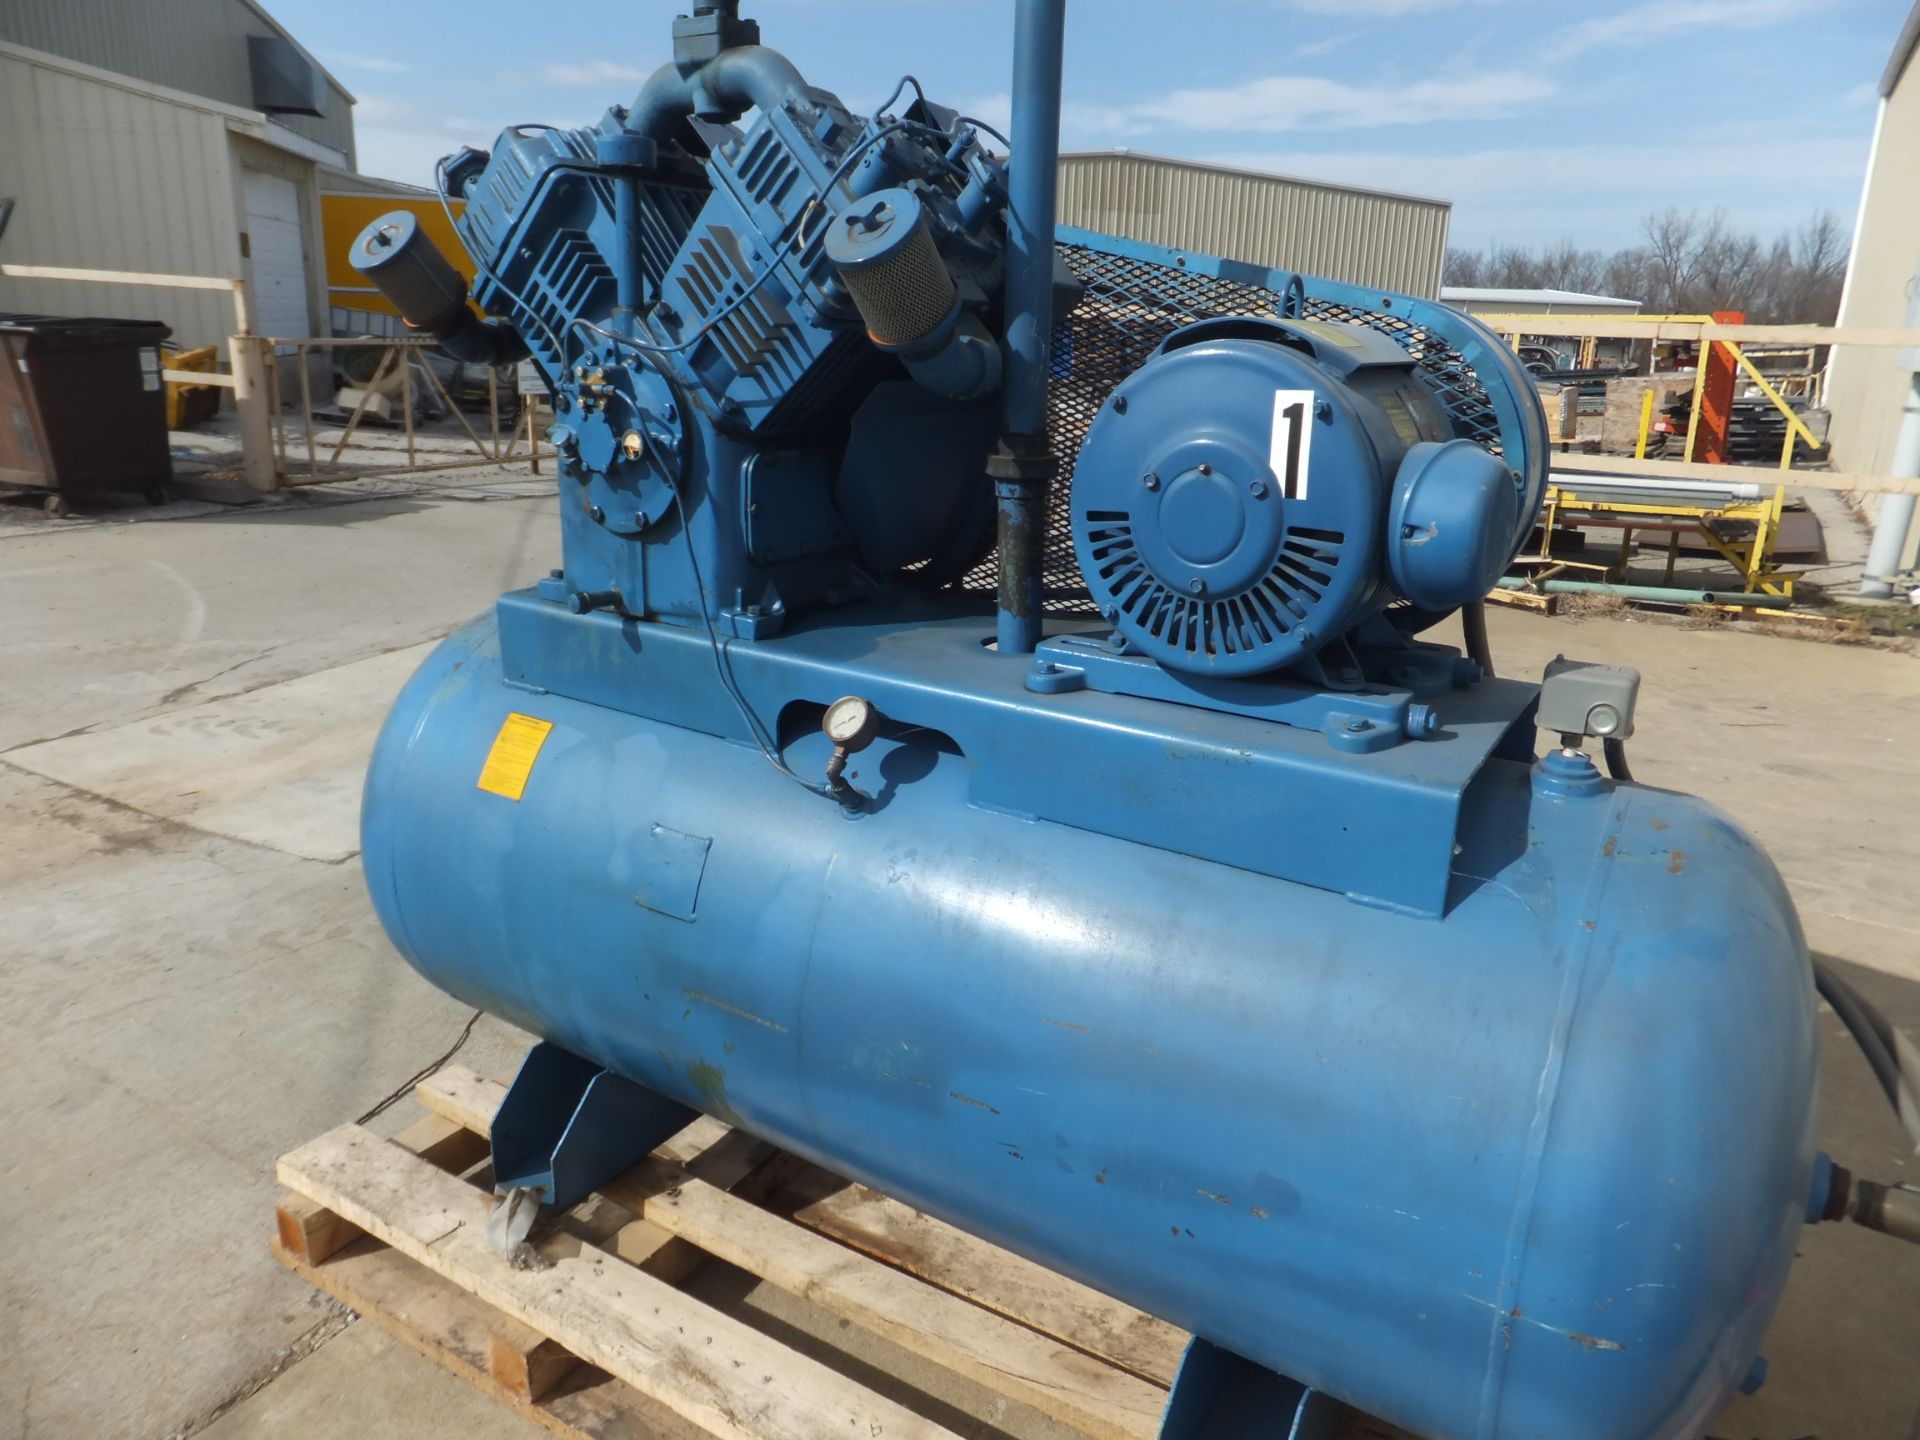 Quincy 25 Hp Reciprocating Air Compressor, Model 5120, S/N 160353 L, Size 6 & 3-1/4 x 4, Lincoln - Image 7 of 10